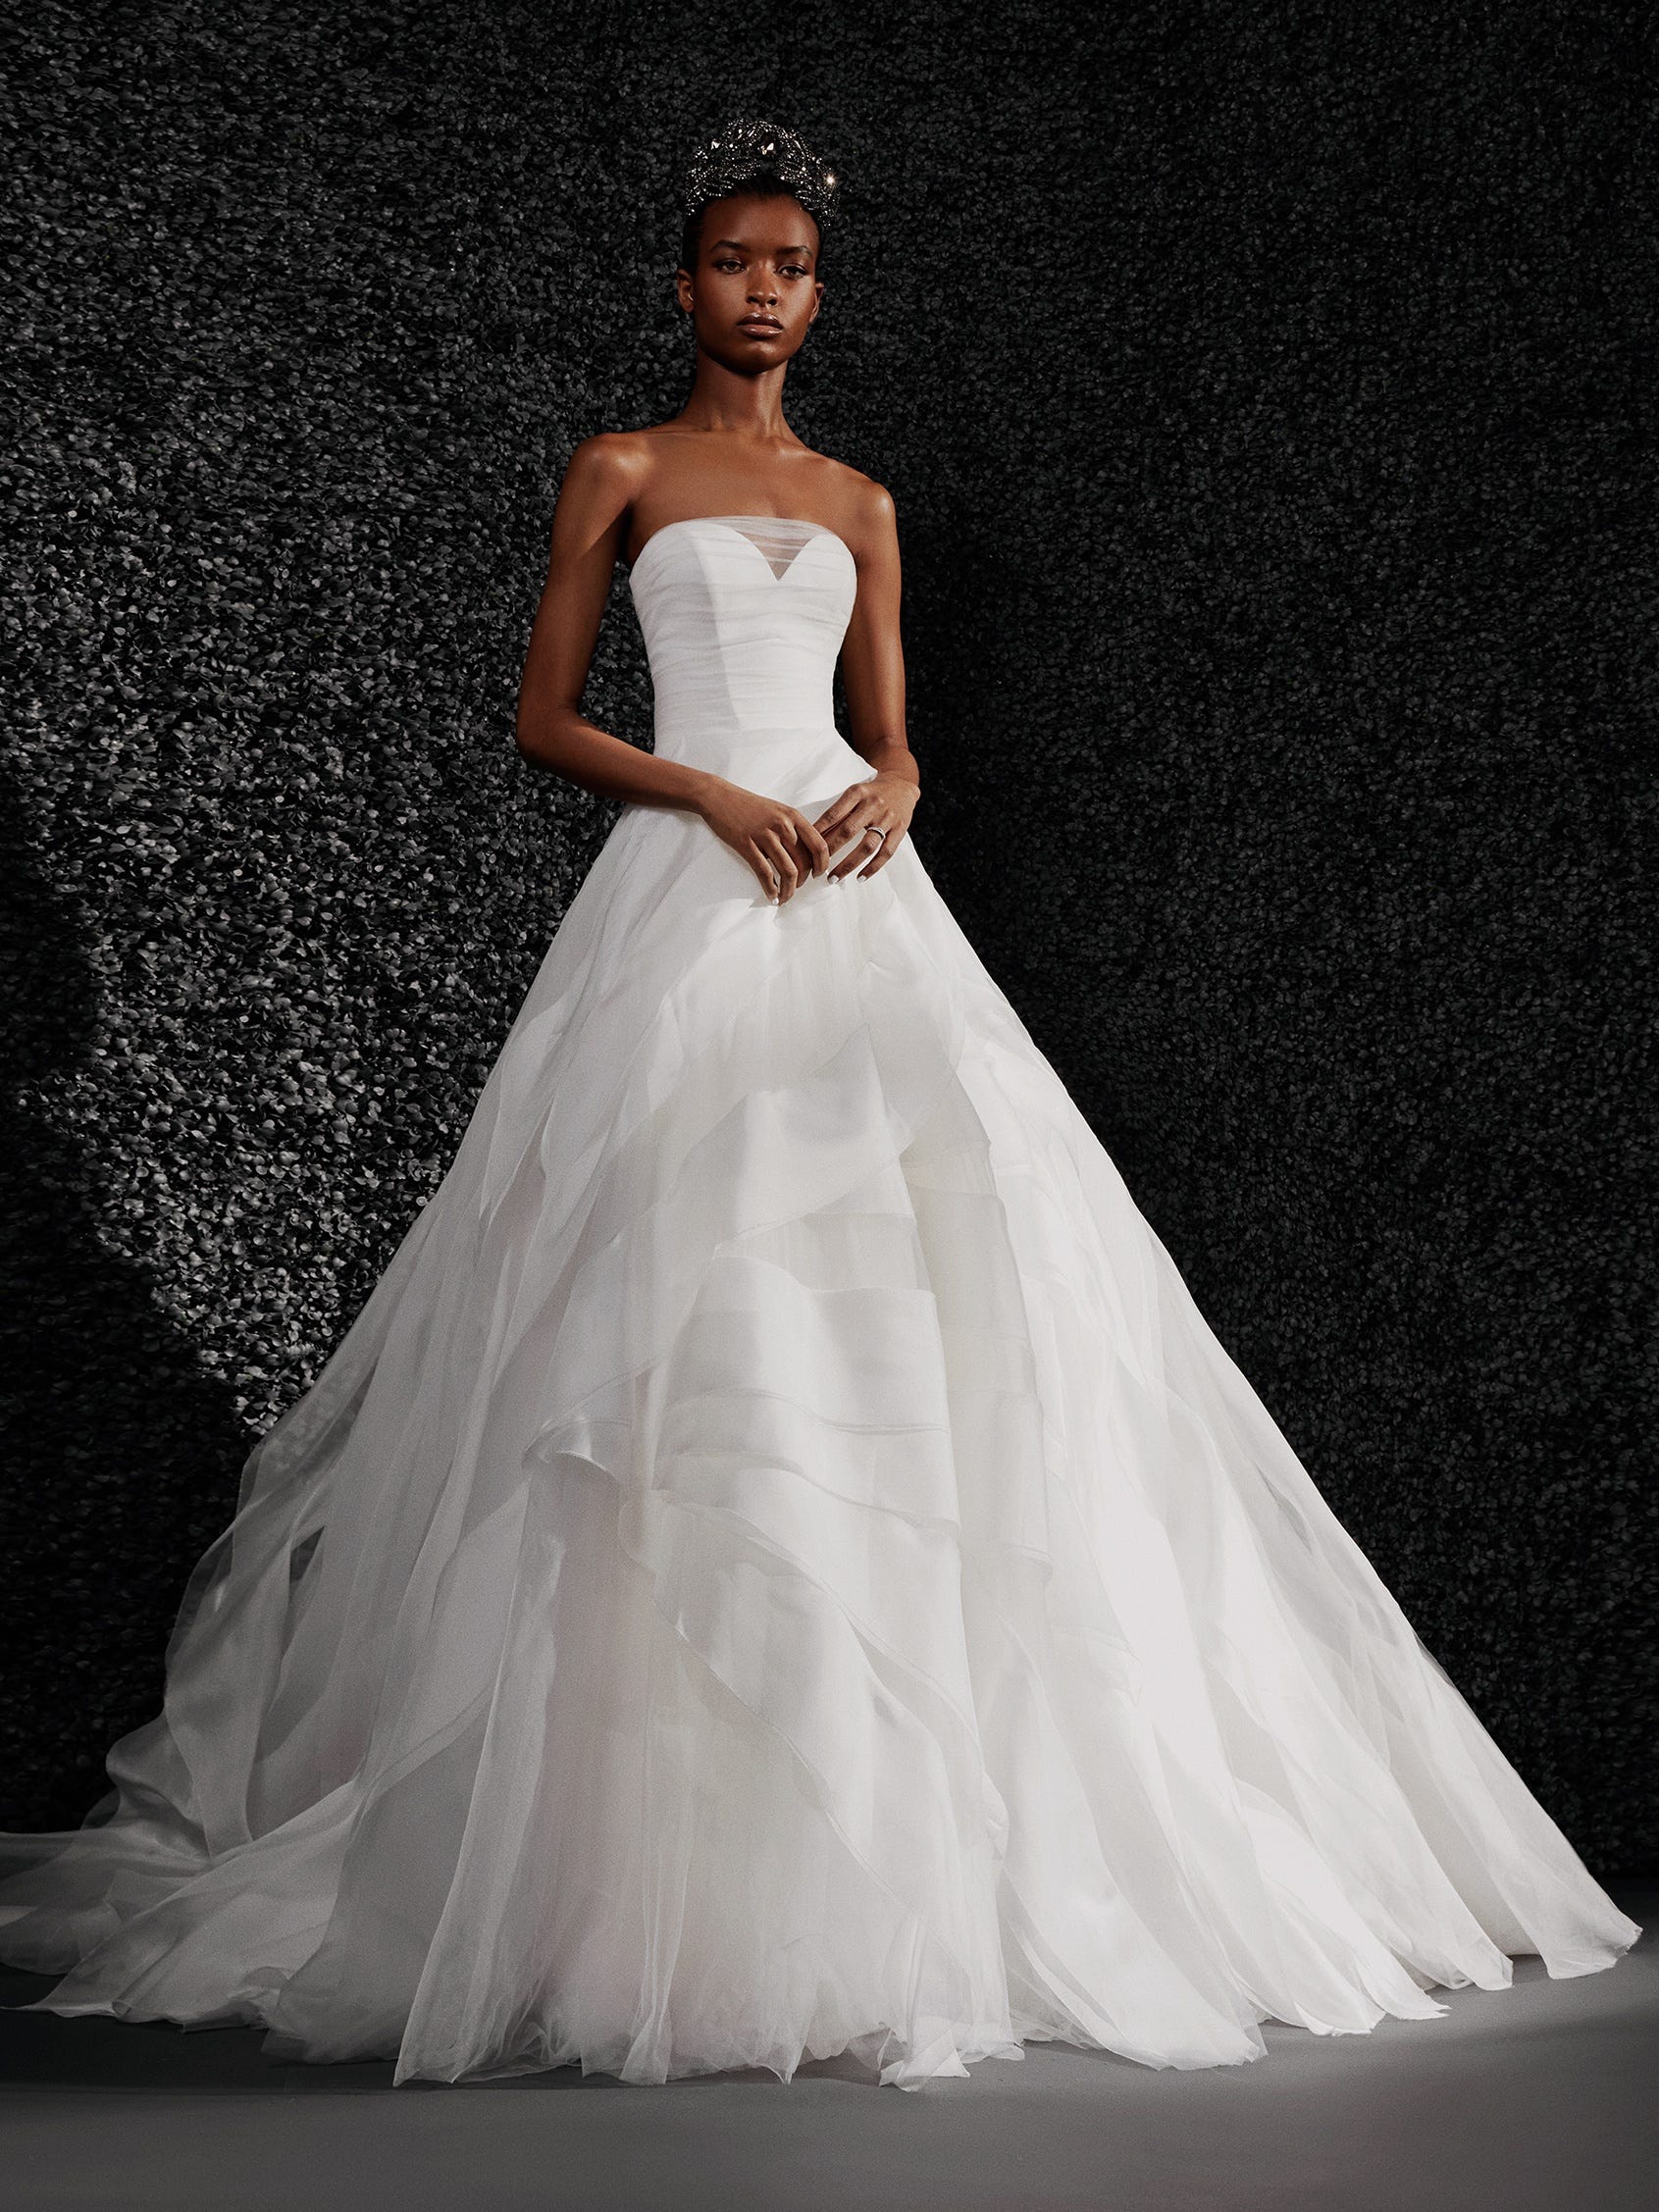 Sleeveless Scoop Neckline Ball Gown Wedding Dress With Beaded Lace And Tulle  Skirt | Kleinfeld Bridal